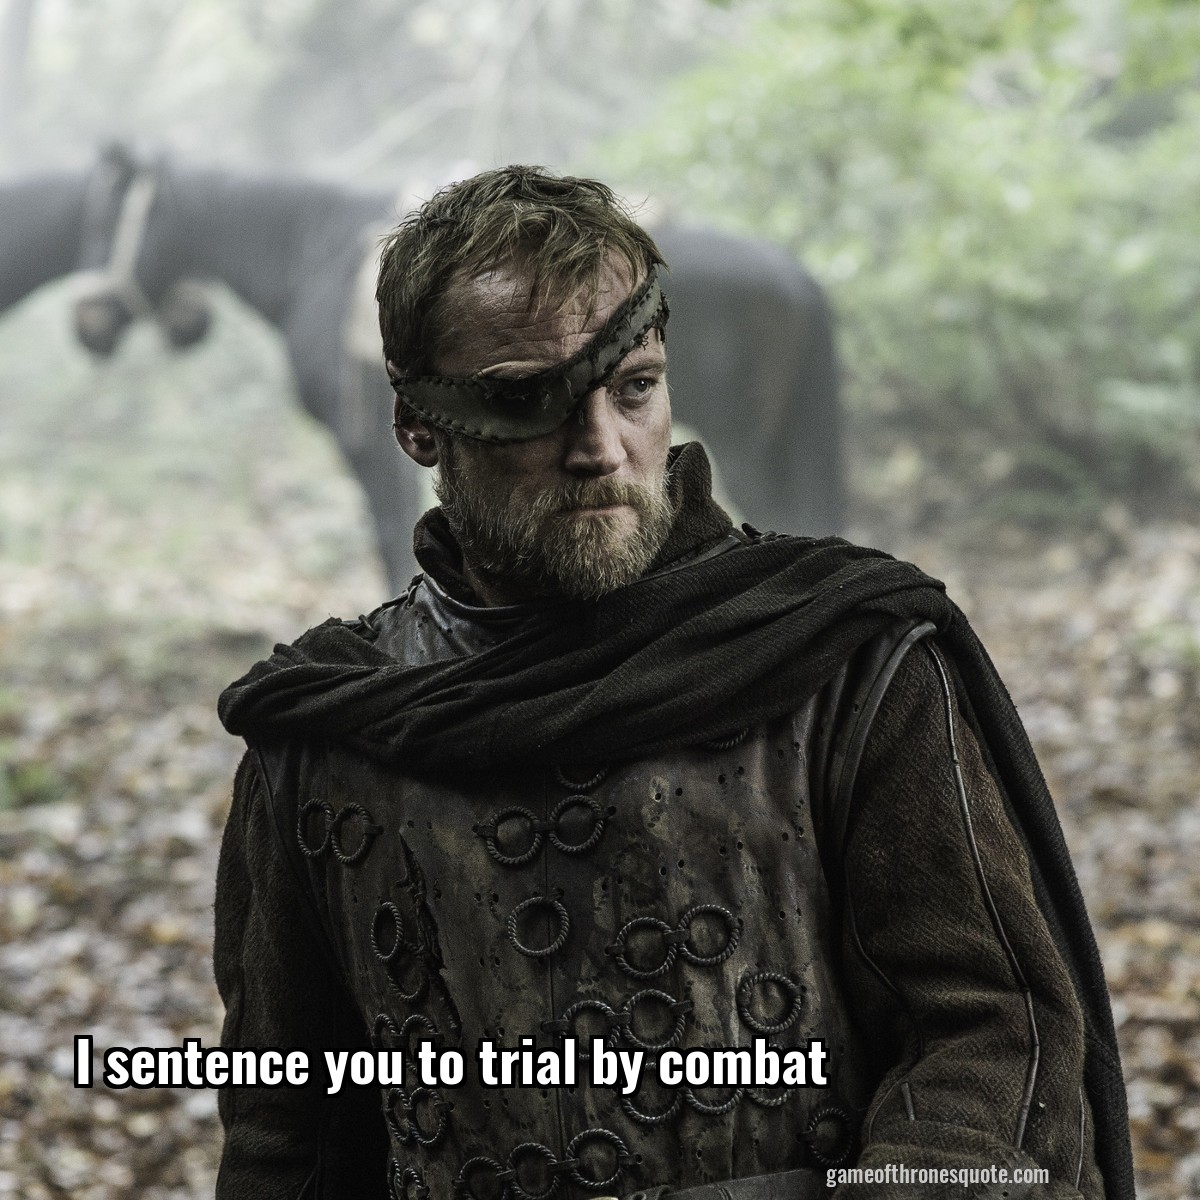 I sentence you to trial by combat